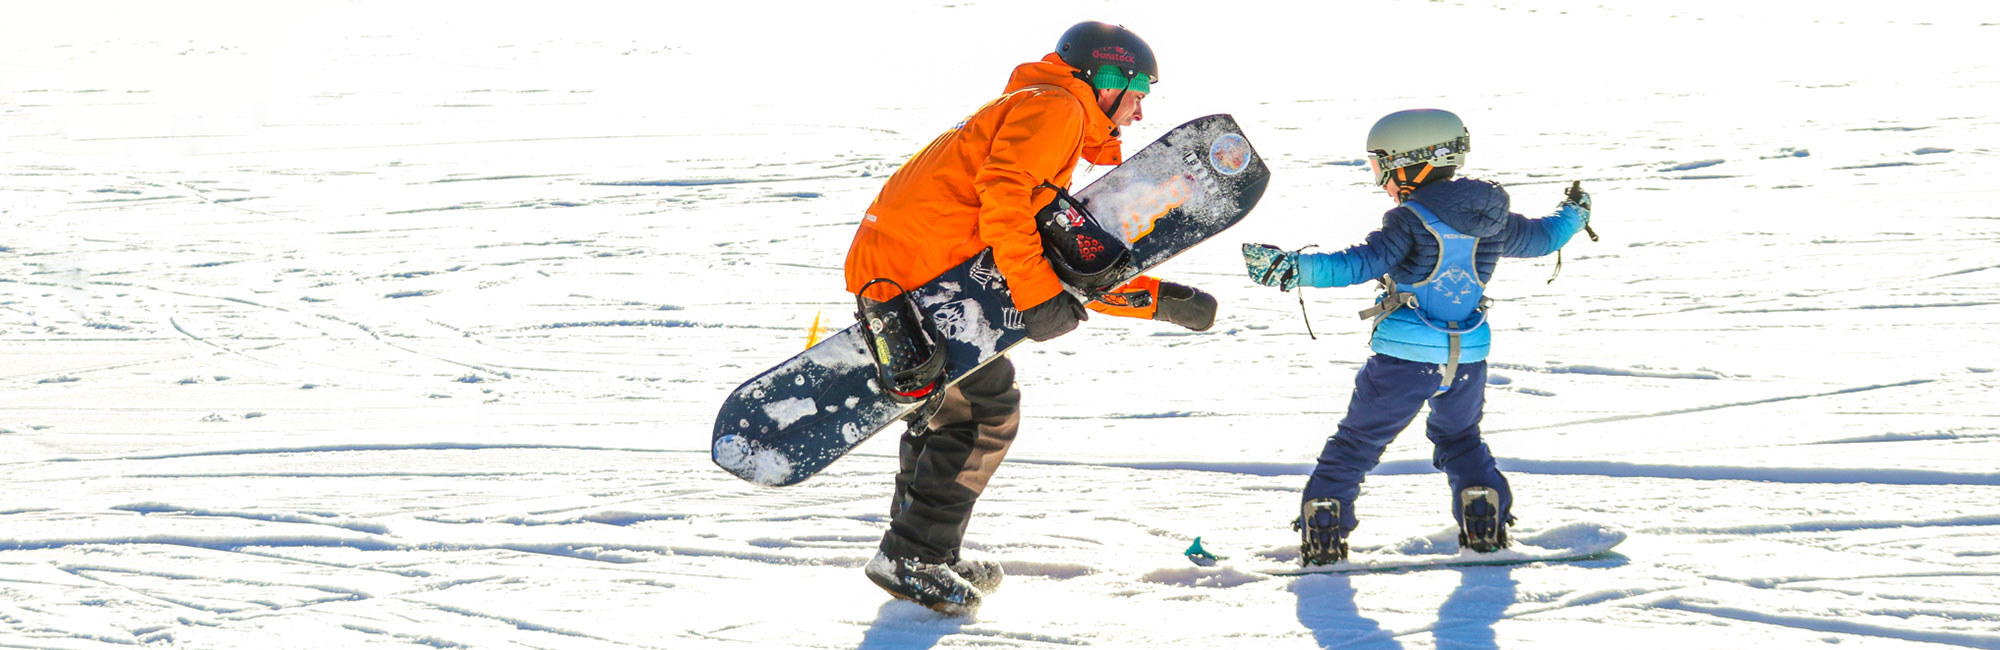 Snowboard instructor with child on snow